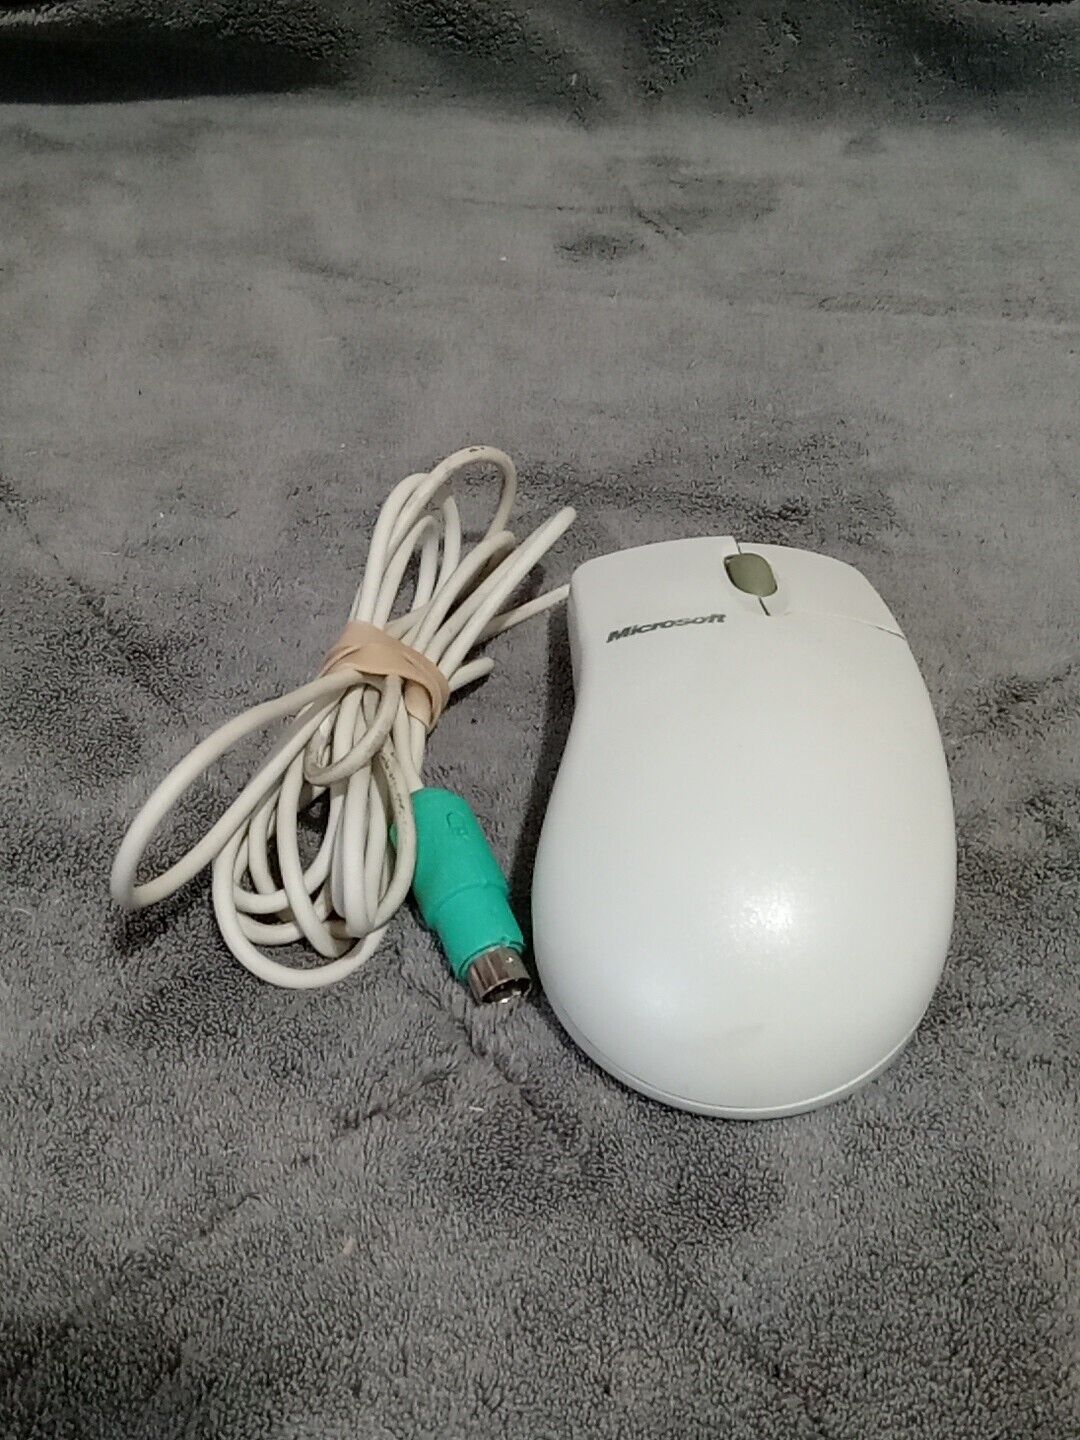 Microsoft IntelliMouse Vintage Ball Mouse 1.2A PS/2 Compatible PN X04-72167